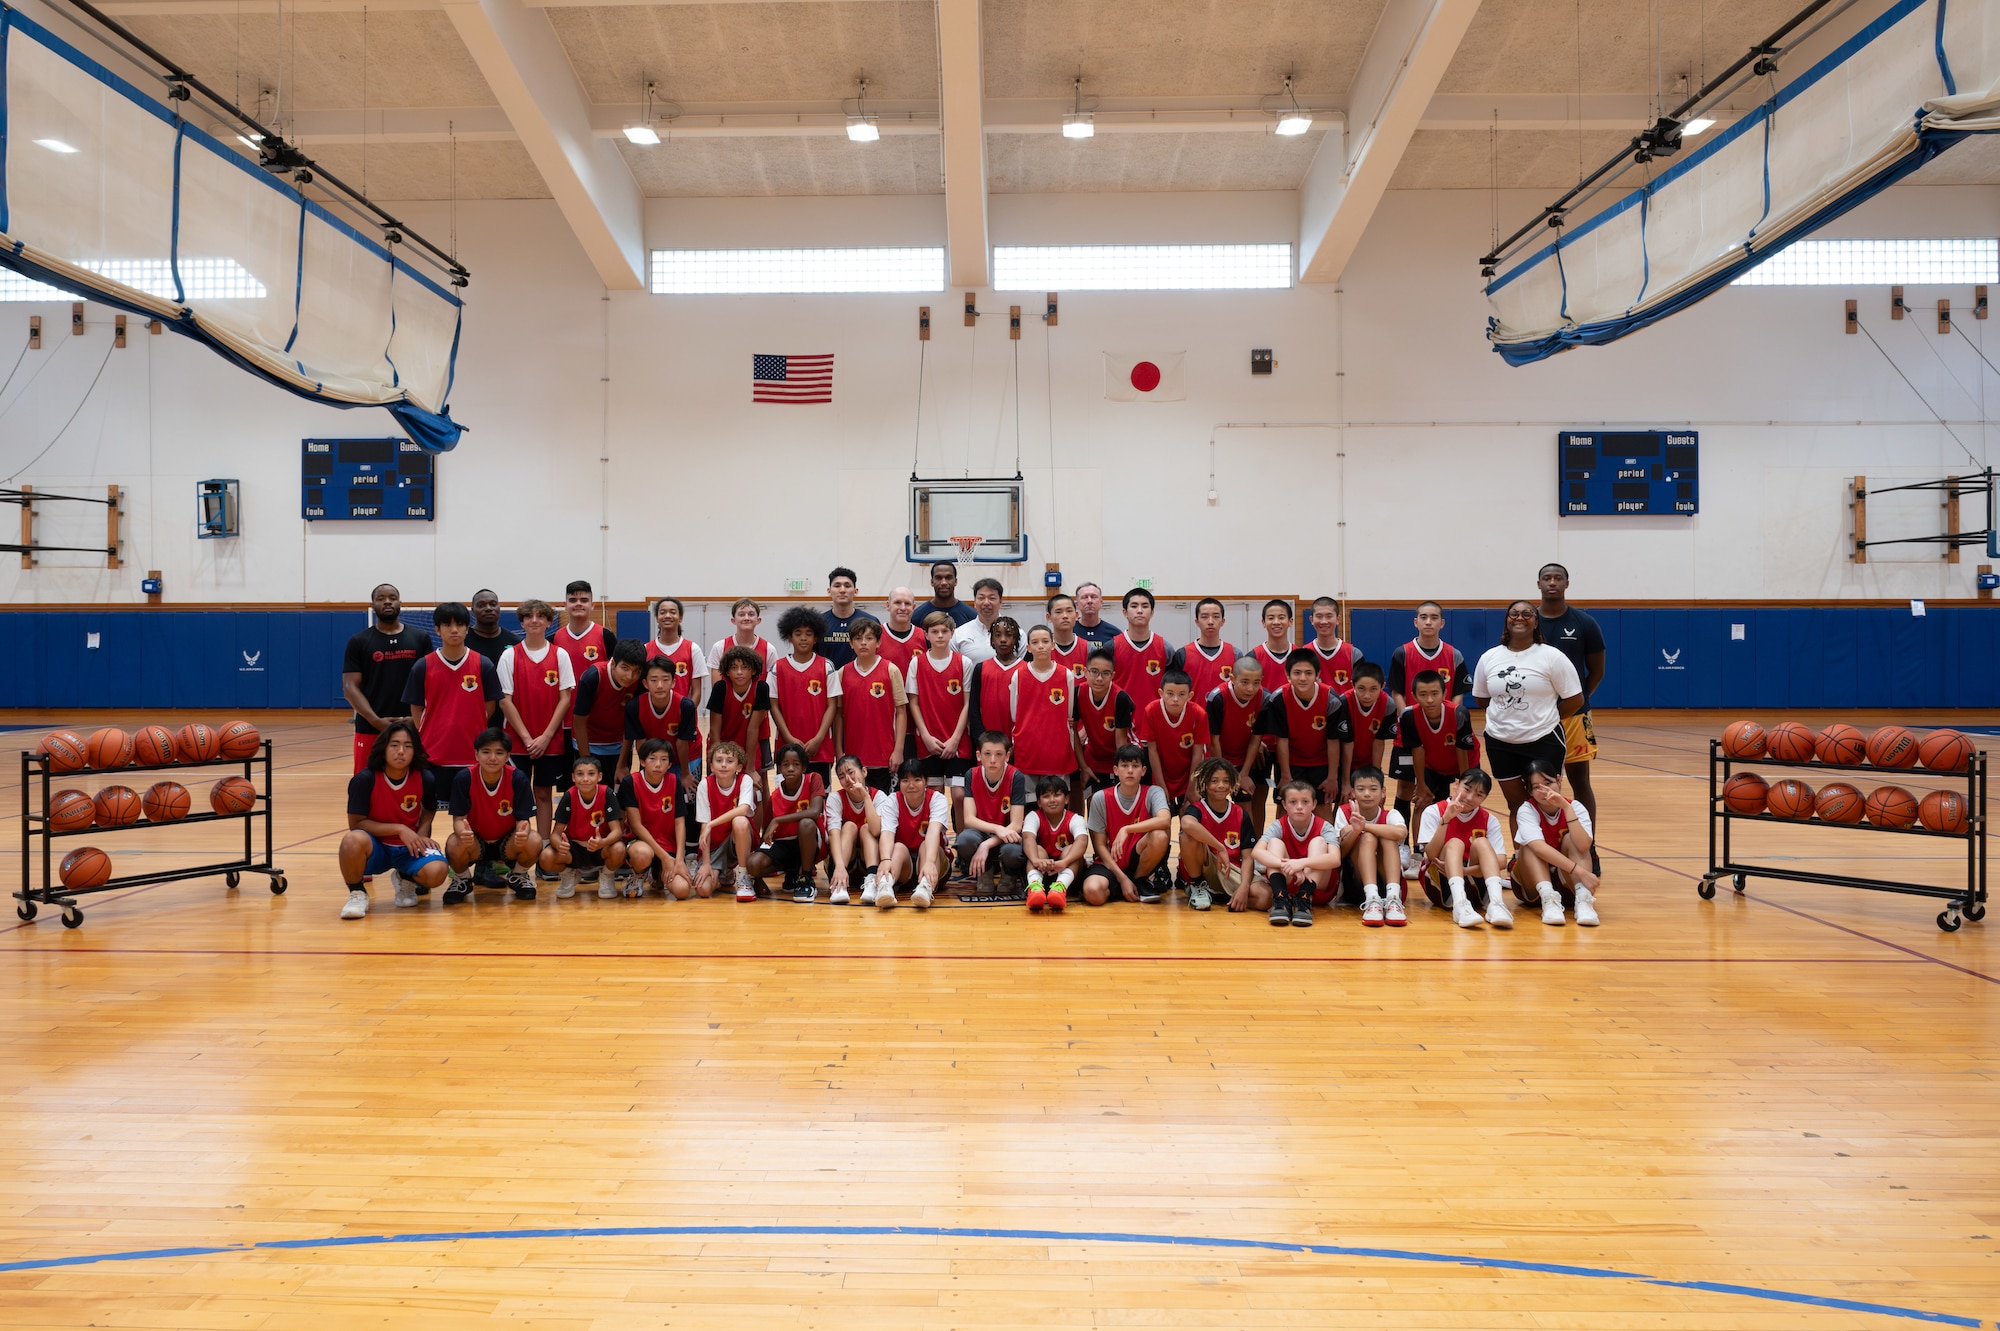 Participants, coaches and mentors of the Chatan Town and Kadena Air Base bilateral basketball camp pose for a group photo